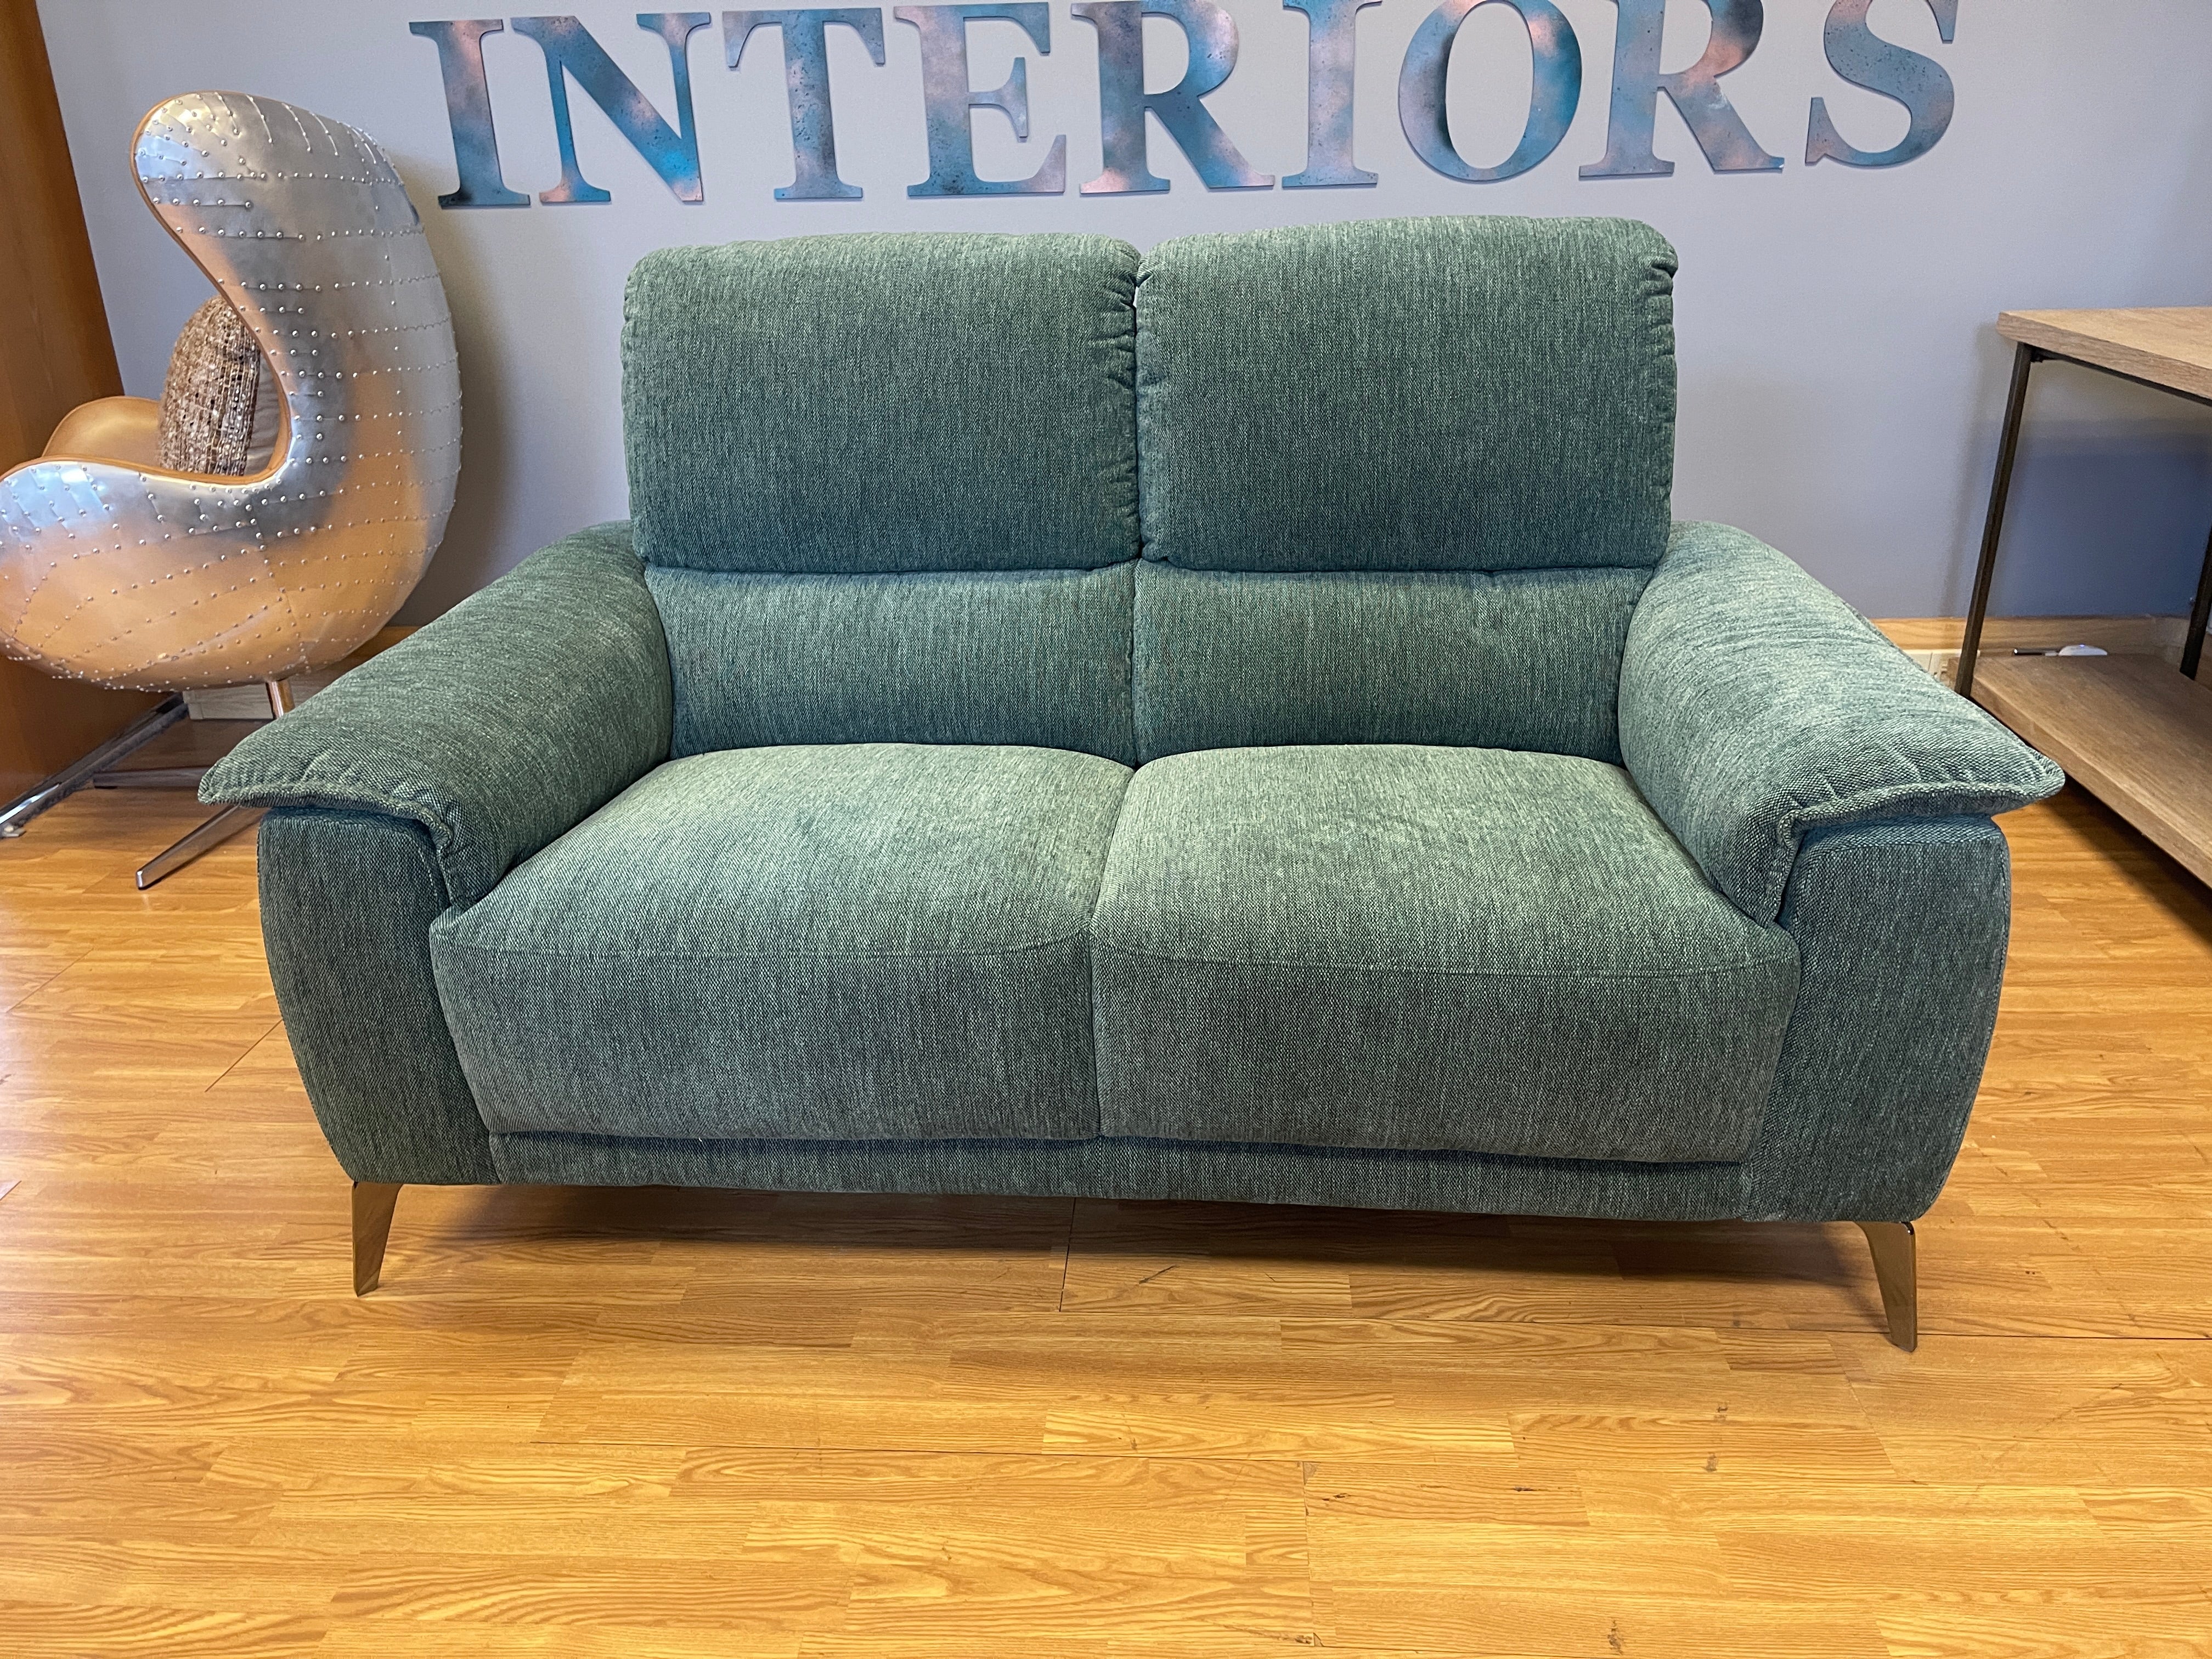 Amalfi 2 seater high back sofa in moss Green chenille mix weave